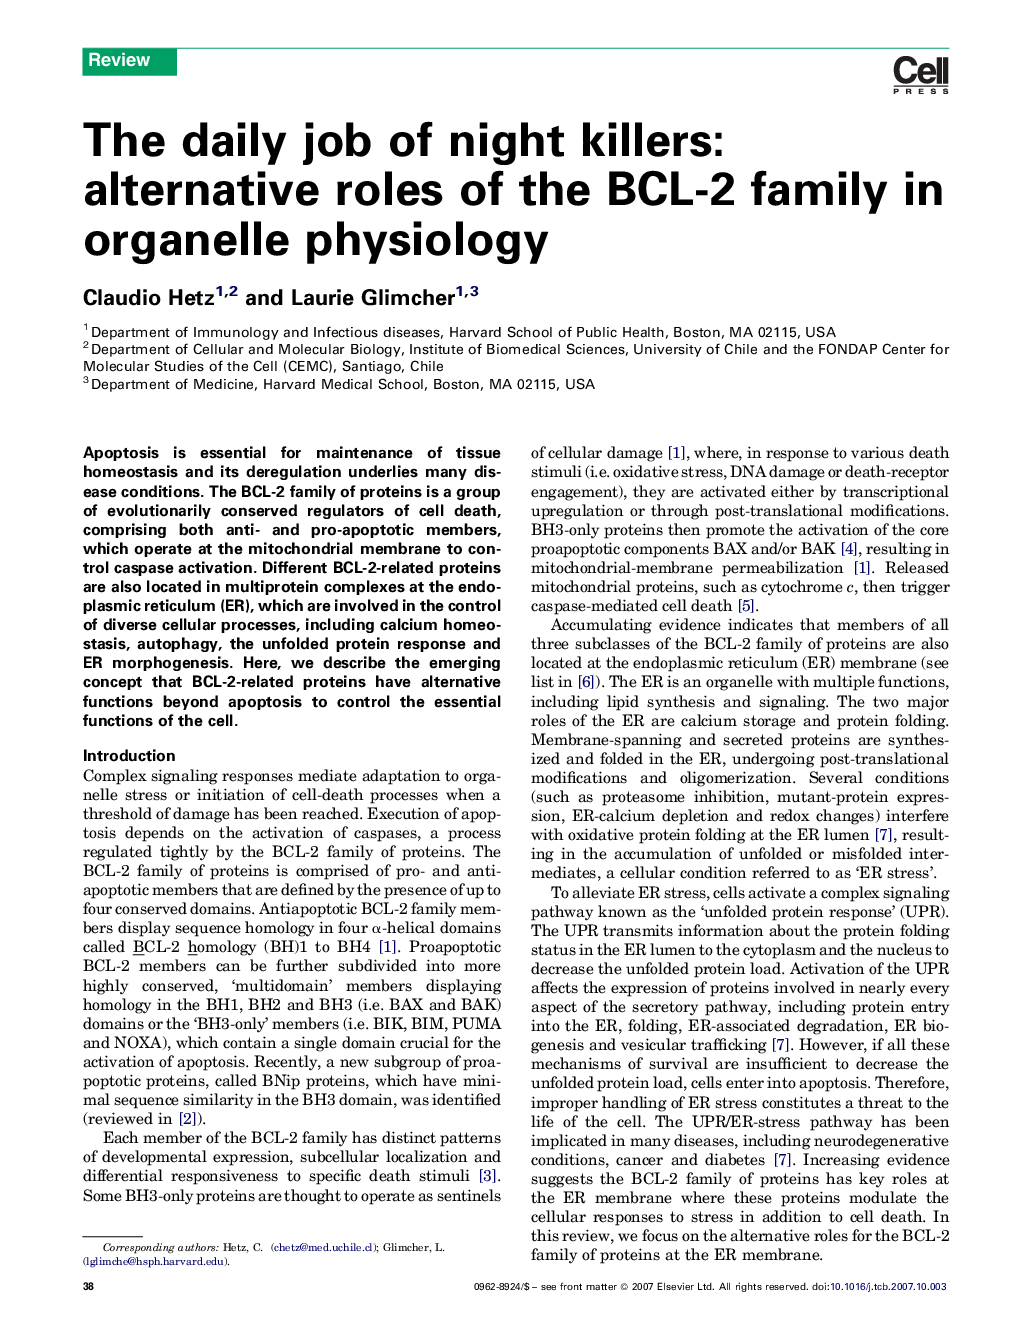 The daily job of night killers: alternative roles of the BCL-2 family in organelle physiology